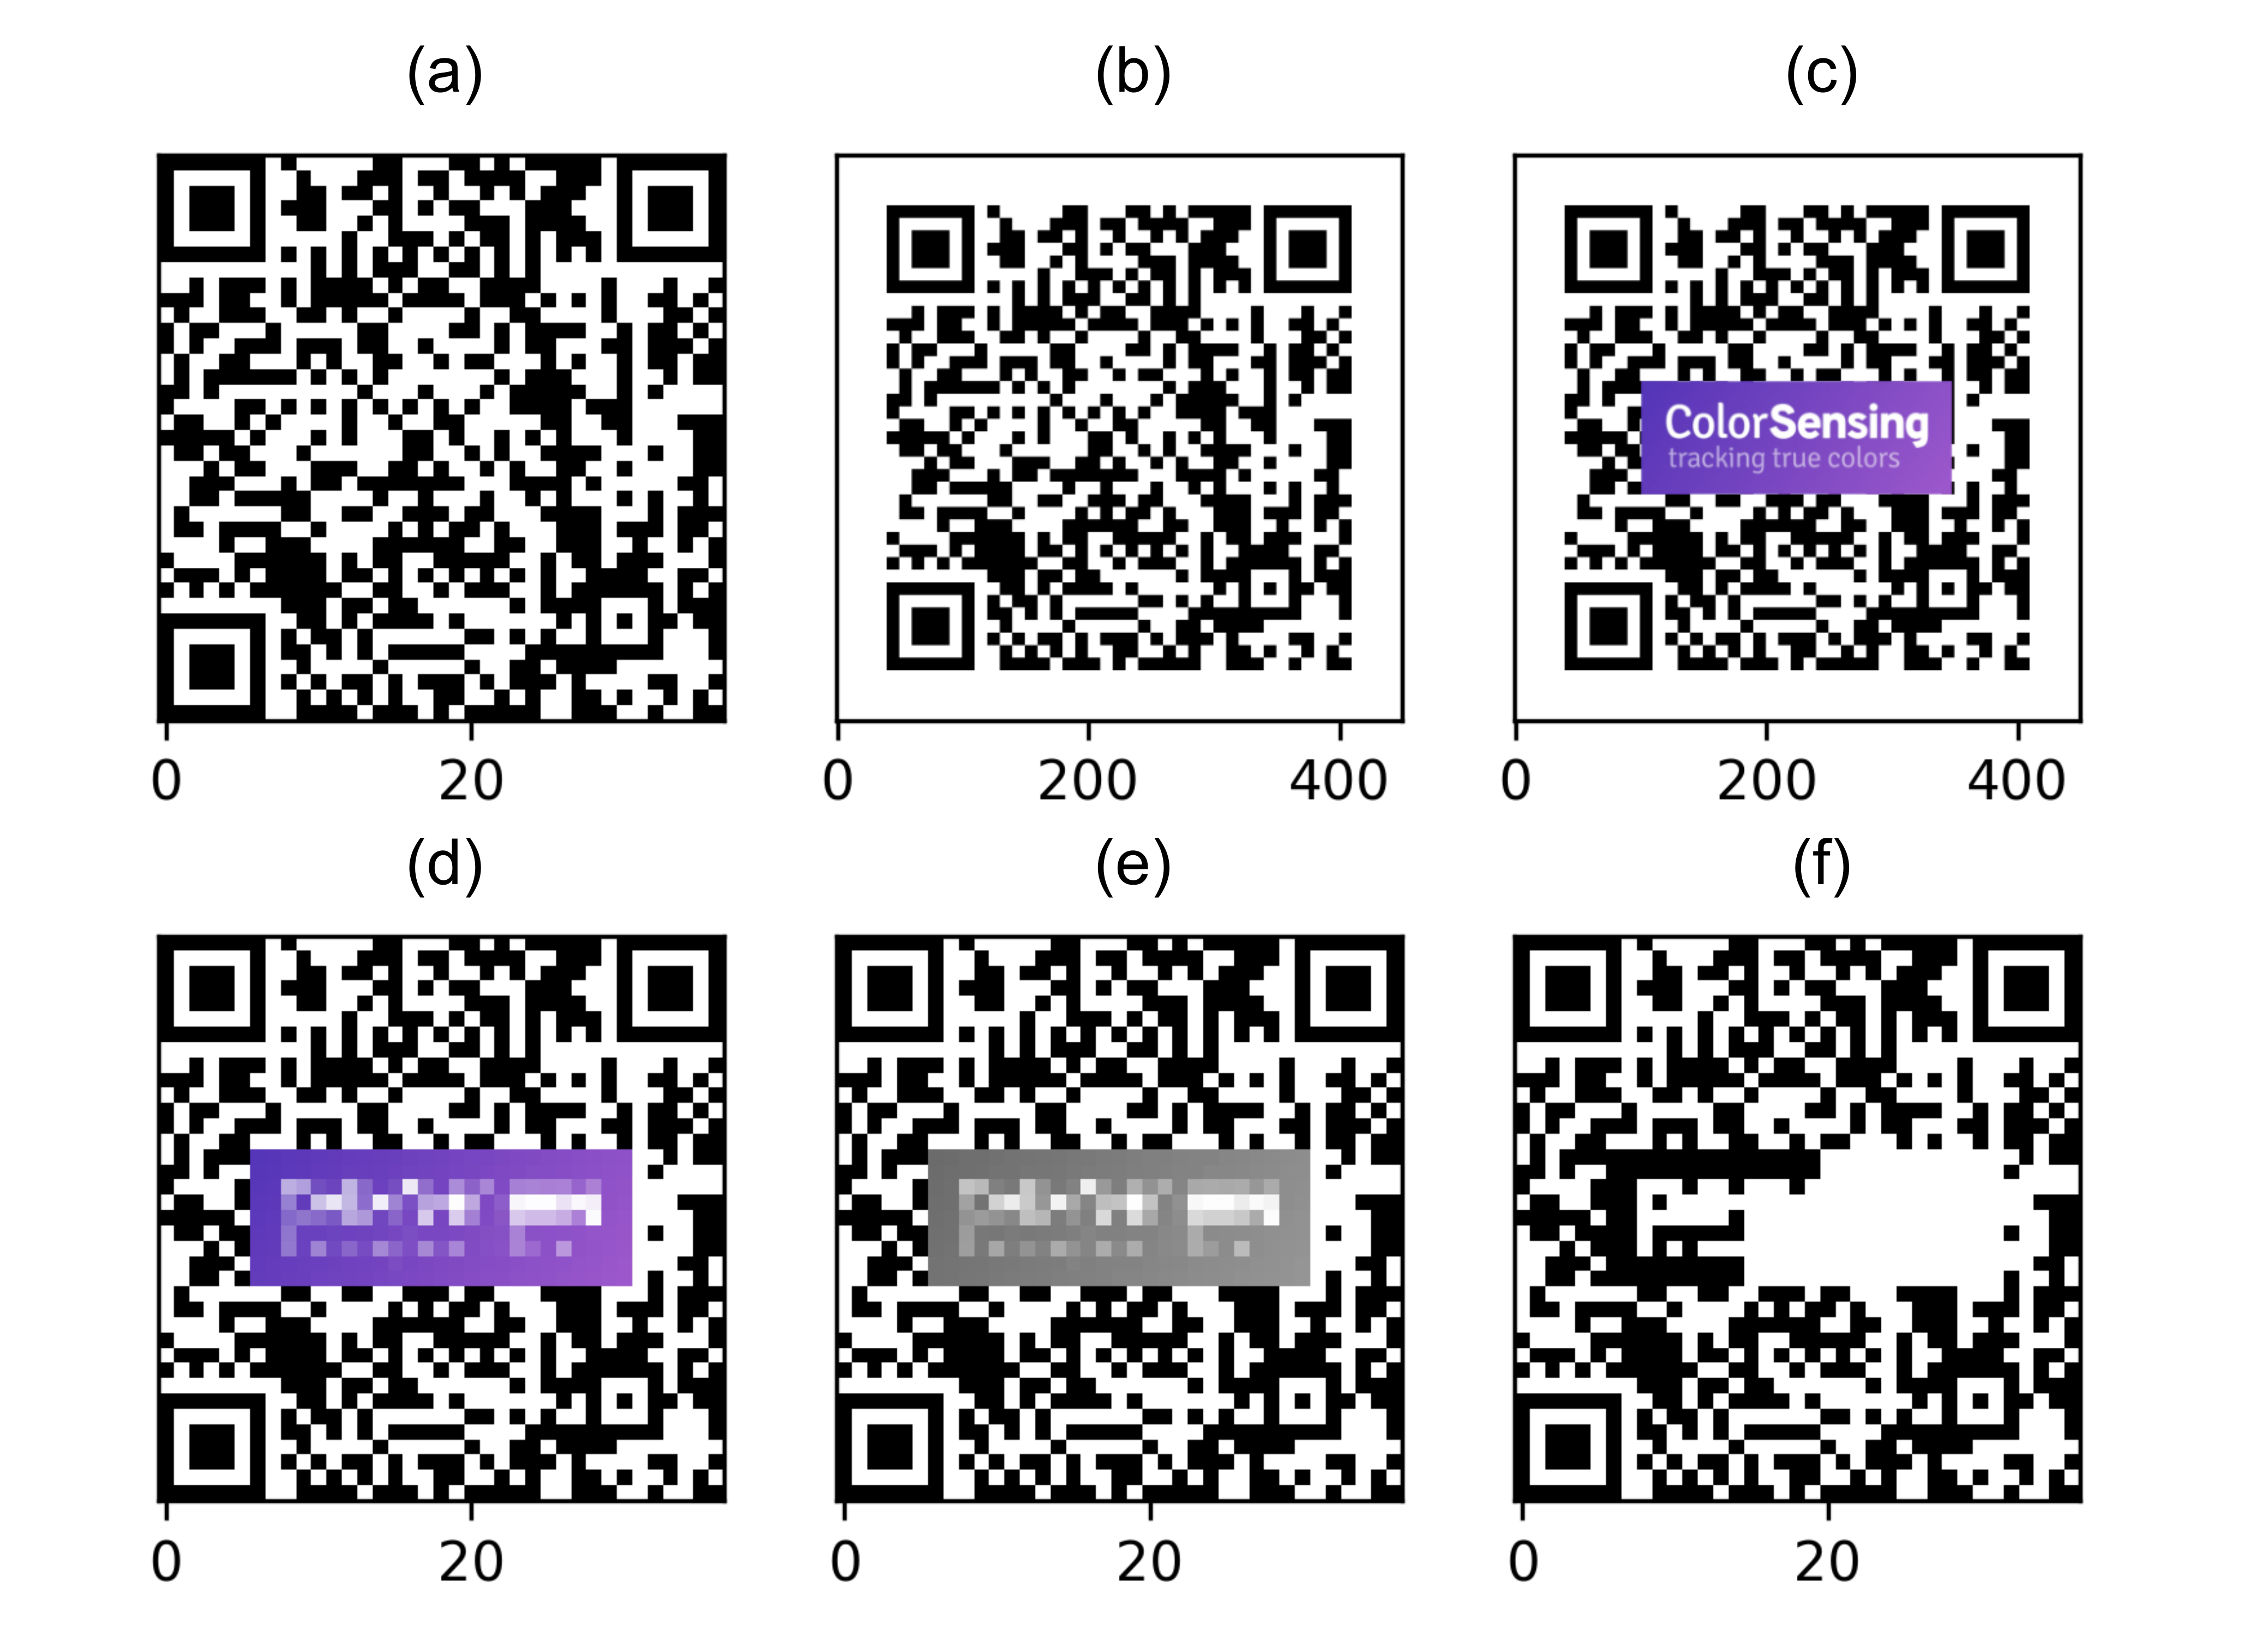 A QR Code is overlaid with a logo, which accumulates error due to the presence of the logo. (a) The QR Code is encoded. (b) The code is resized to accommodate the logo. (c) The logo is placed on top of the QR Code. (d) The code is “captured” and down-sampled again. (e) The sampled image is passed to grayscale. (f) The image is binarized, the apparent QR Code differs from the original QR Code (a). 